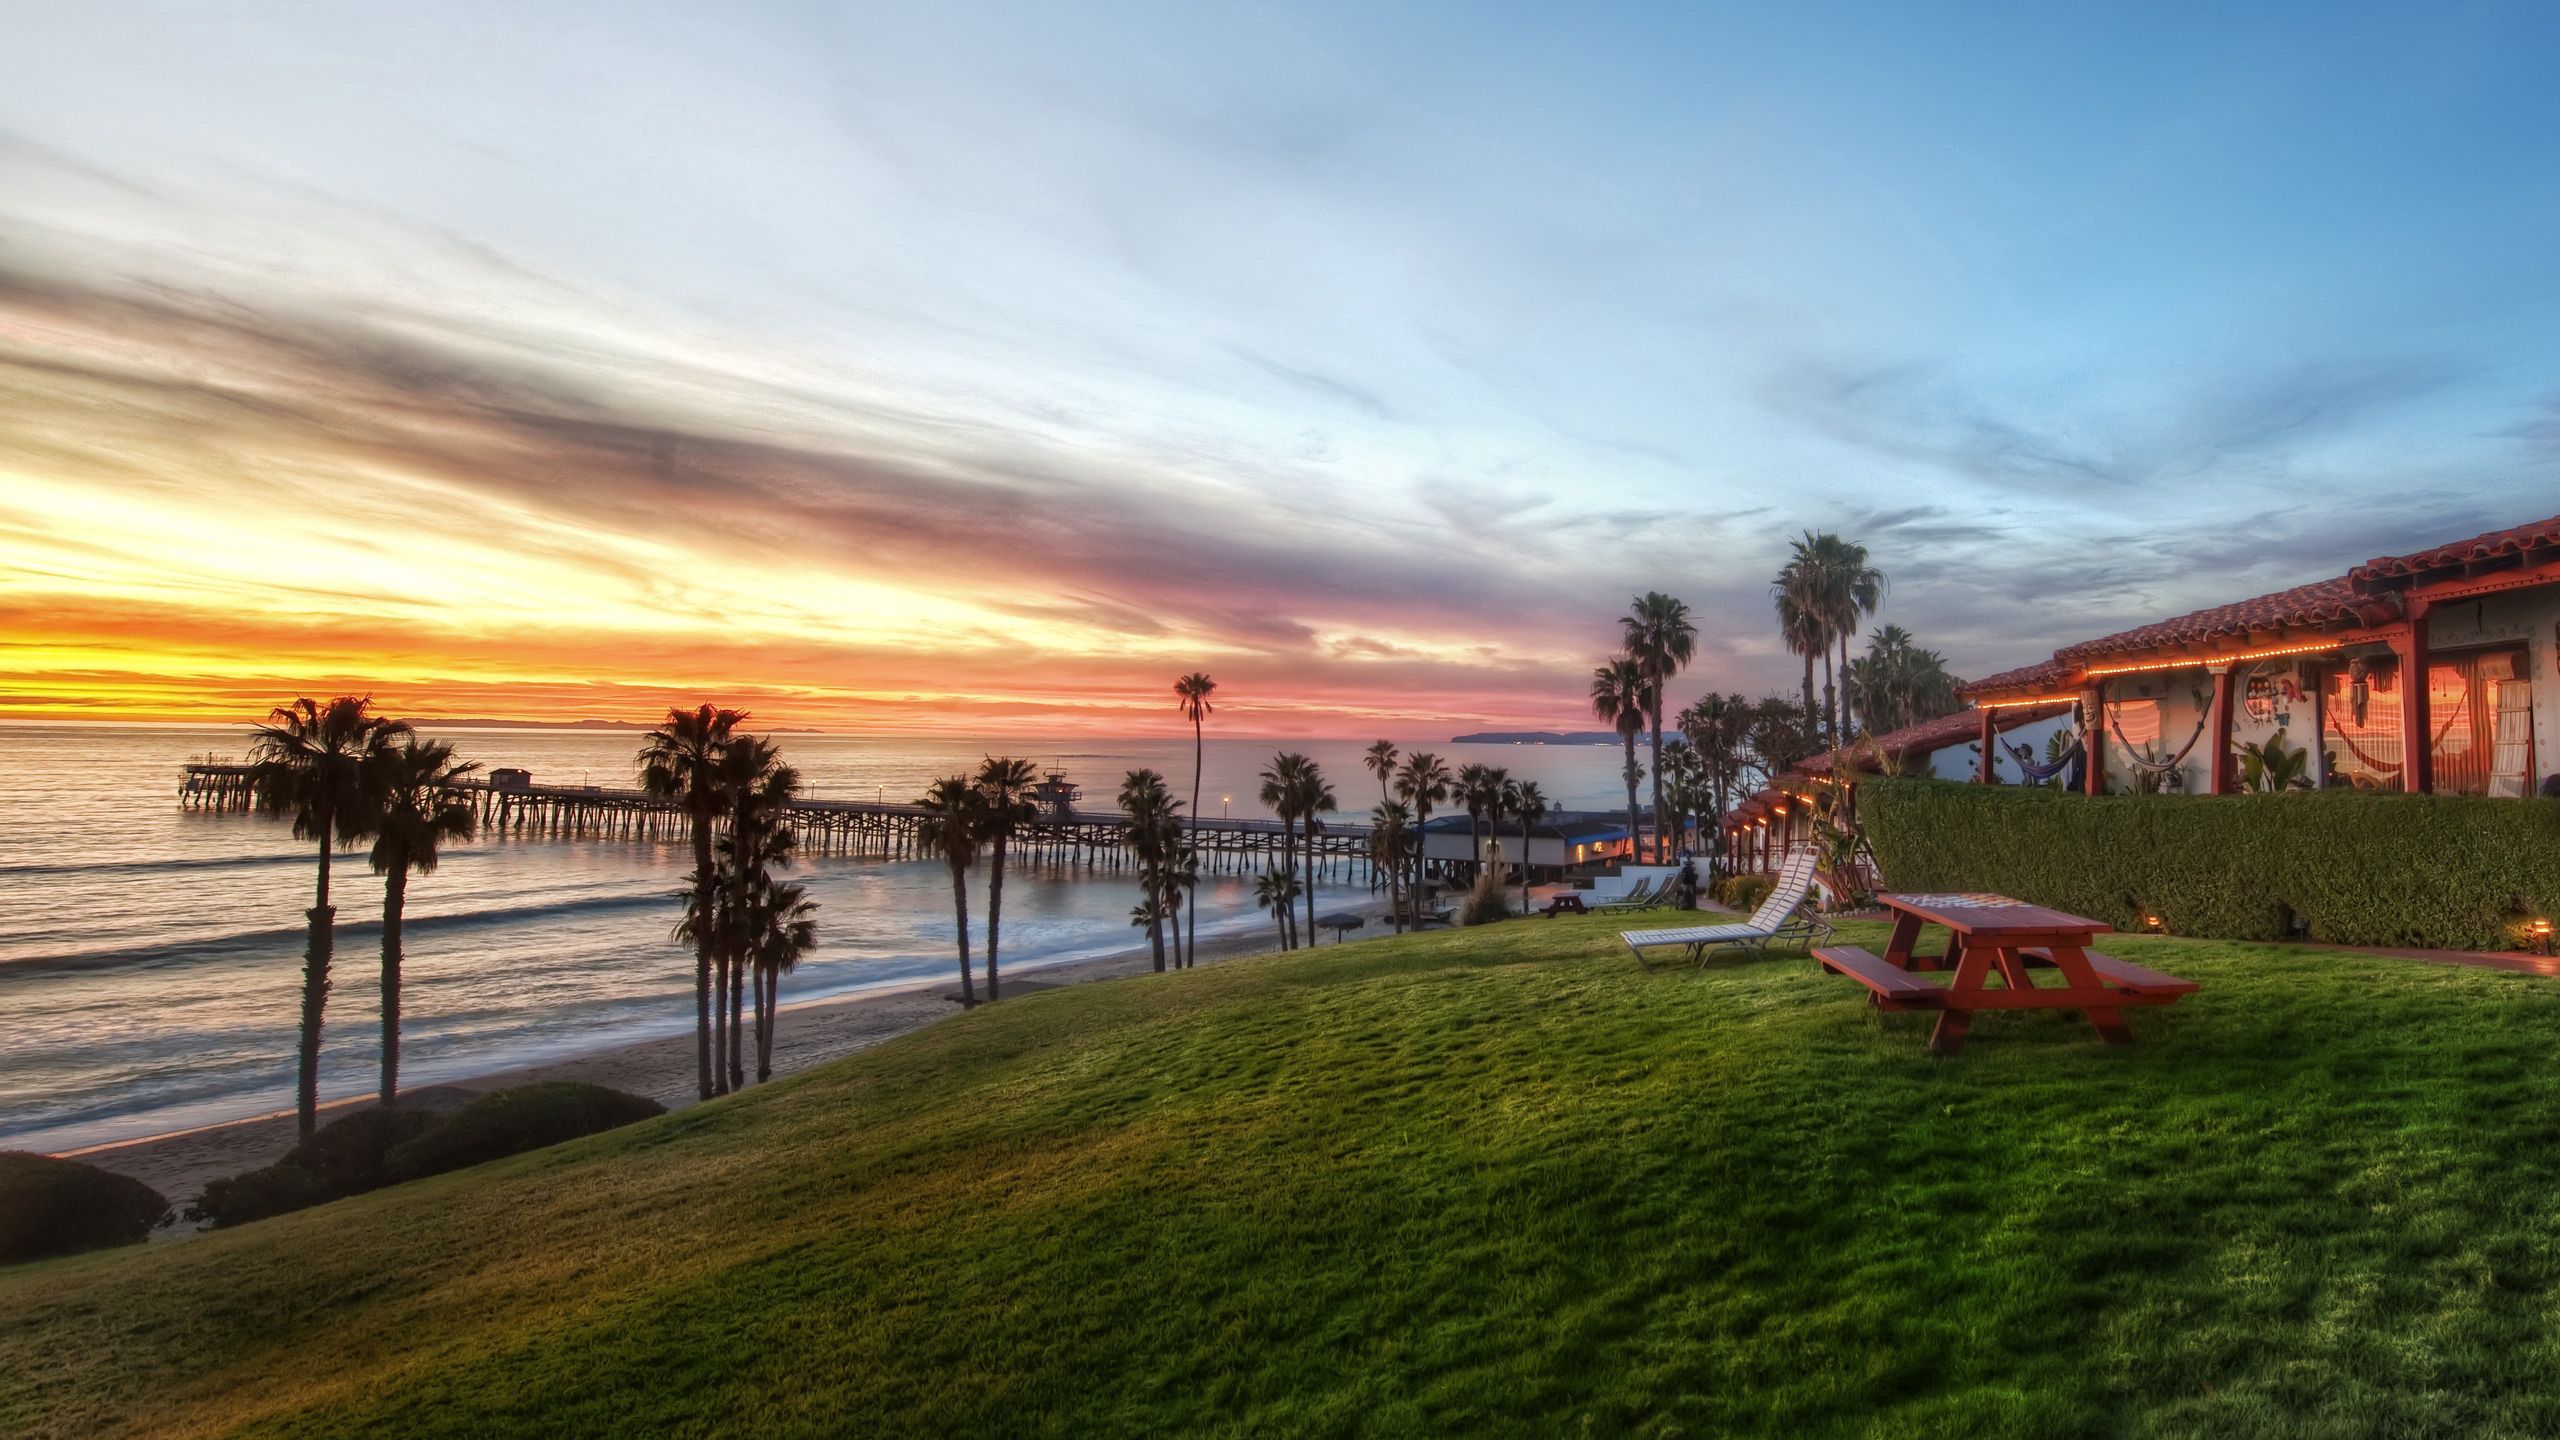 slope, benches, picnic, nature, sea, palms, bank, shore, evening, table 4K Ultra